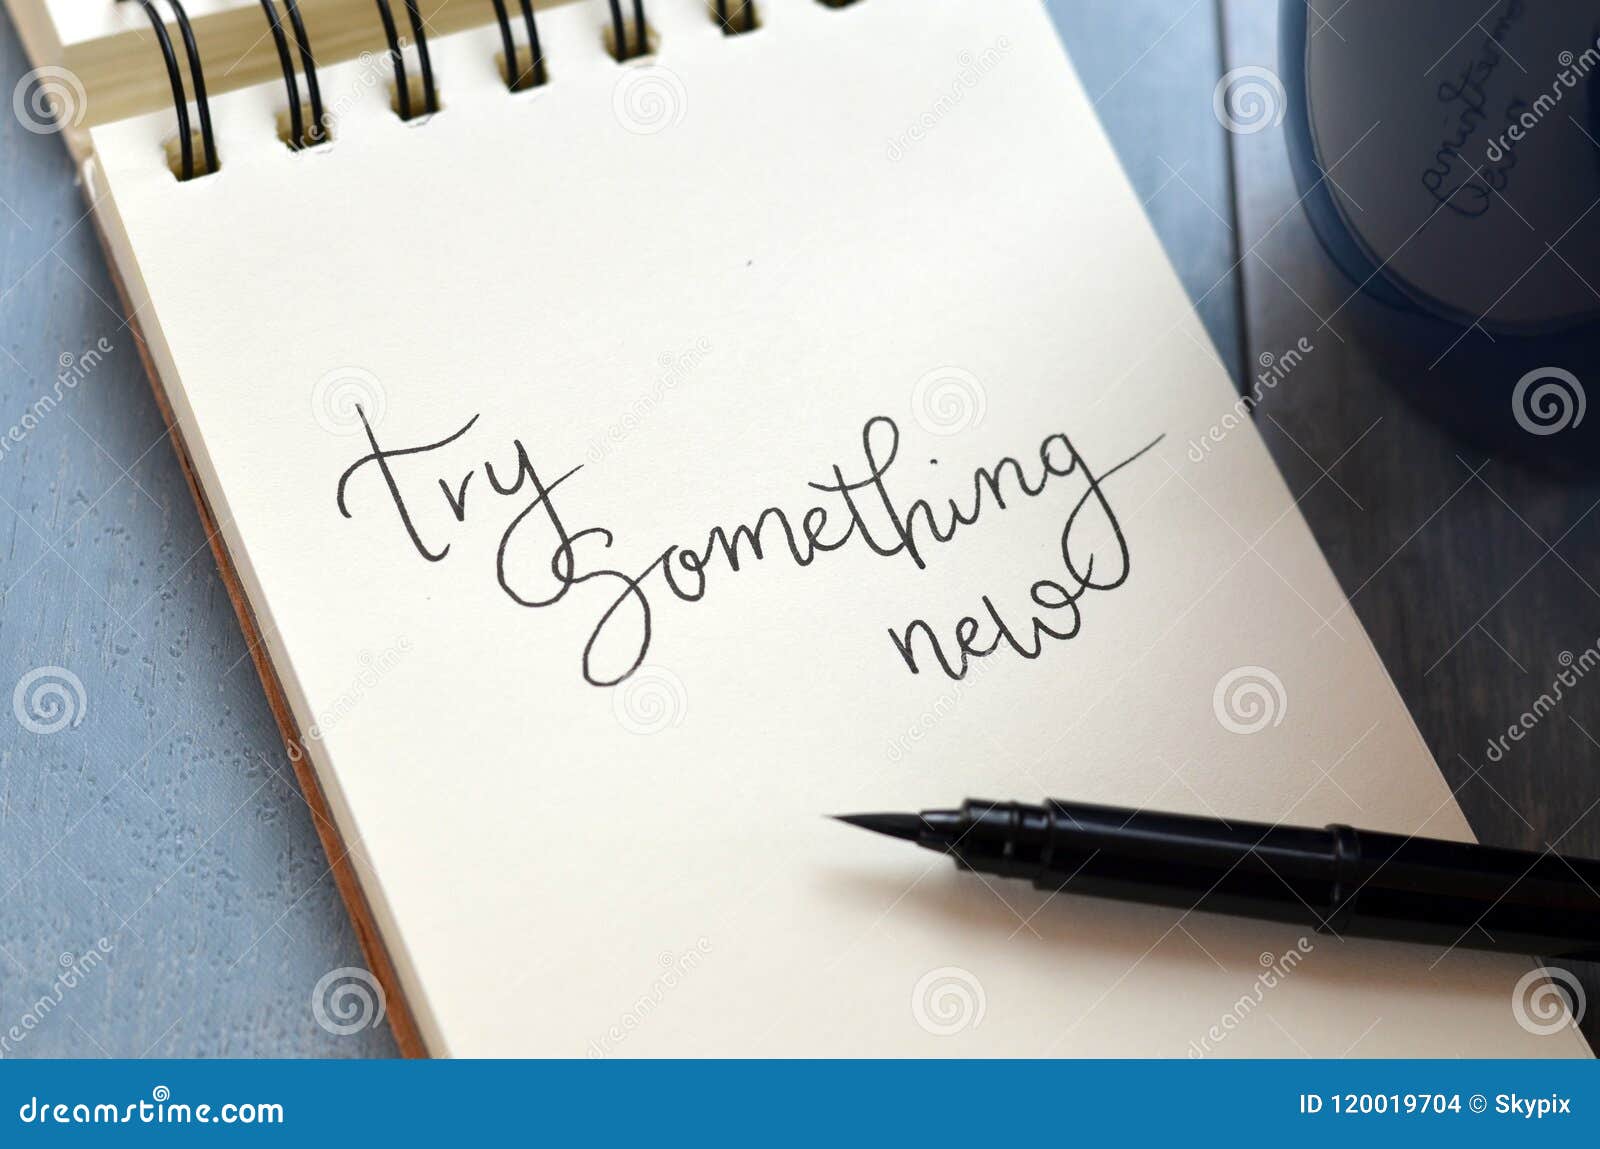 try something new hand-lettered in notepad